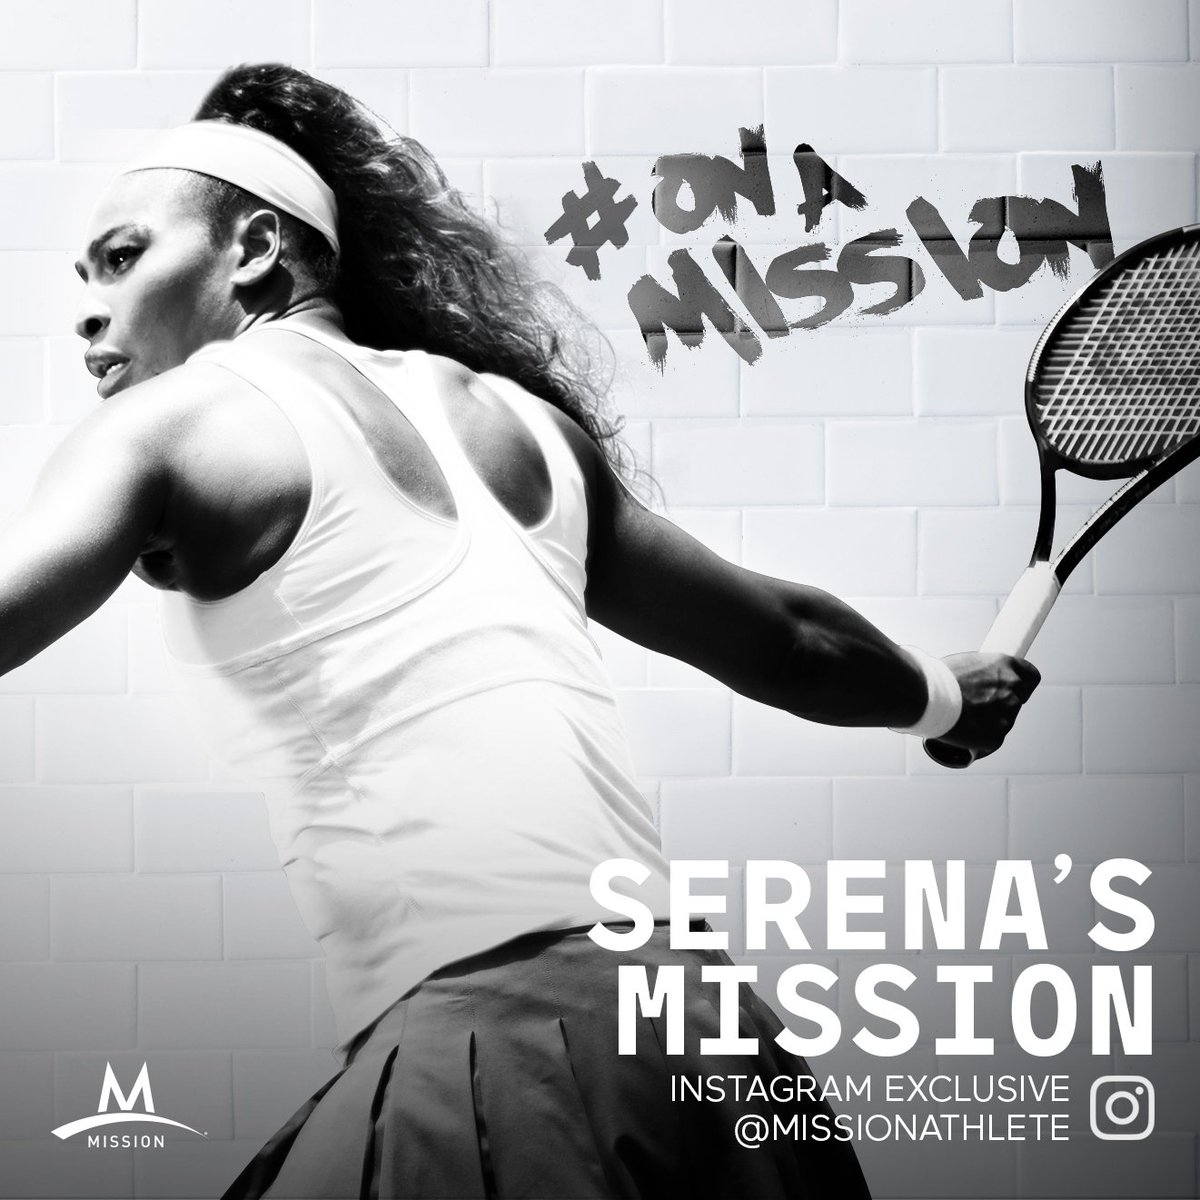 The next two weeks I'll be posting my favorite #USOpen moments. Follow @MissionAthlete on IG & join me! #onamission https://t.co/3jHx8NRr8l